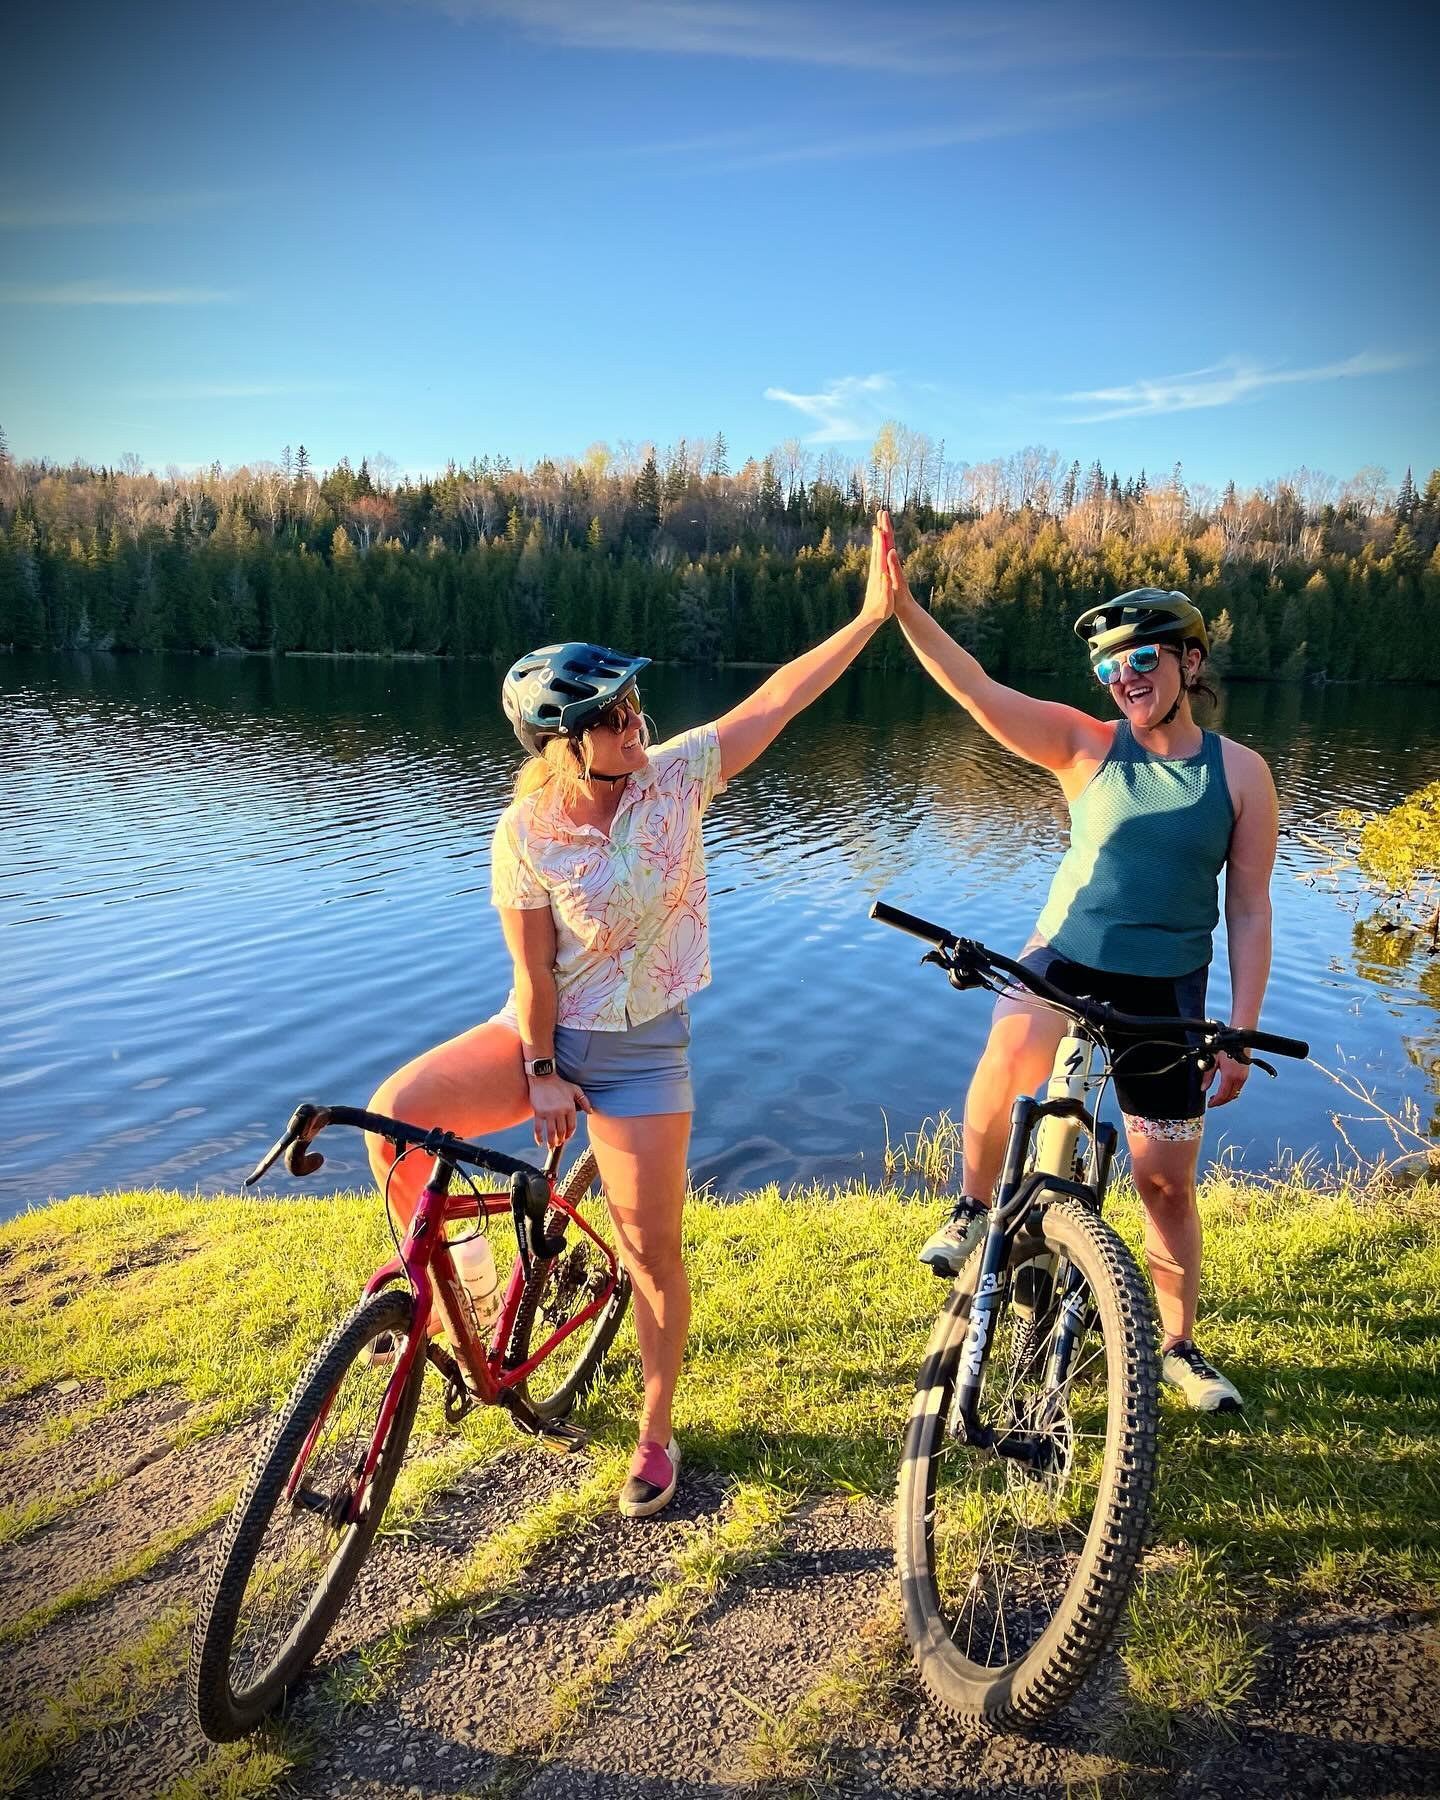 ✨If this isn&rsquo;t the best damn way to end a day, we don&rsquo;t know what is!
 
Join Studium Member Meet Ups:
🚴&zwj;♀️ Tuesdays for Post Pilates Pedal at 6:30pm after Lilias&rsquo; pilates class in Danville
🚴&zwj;♀️ Wednesdays for Bike + Brews 